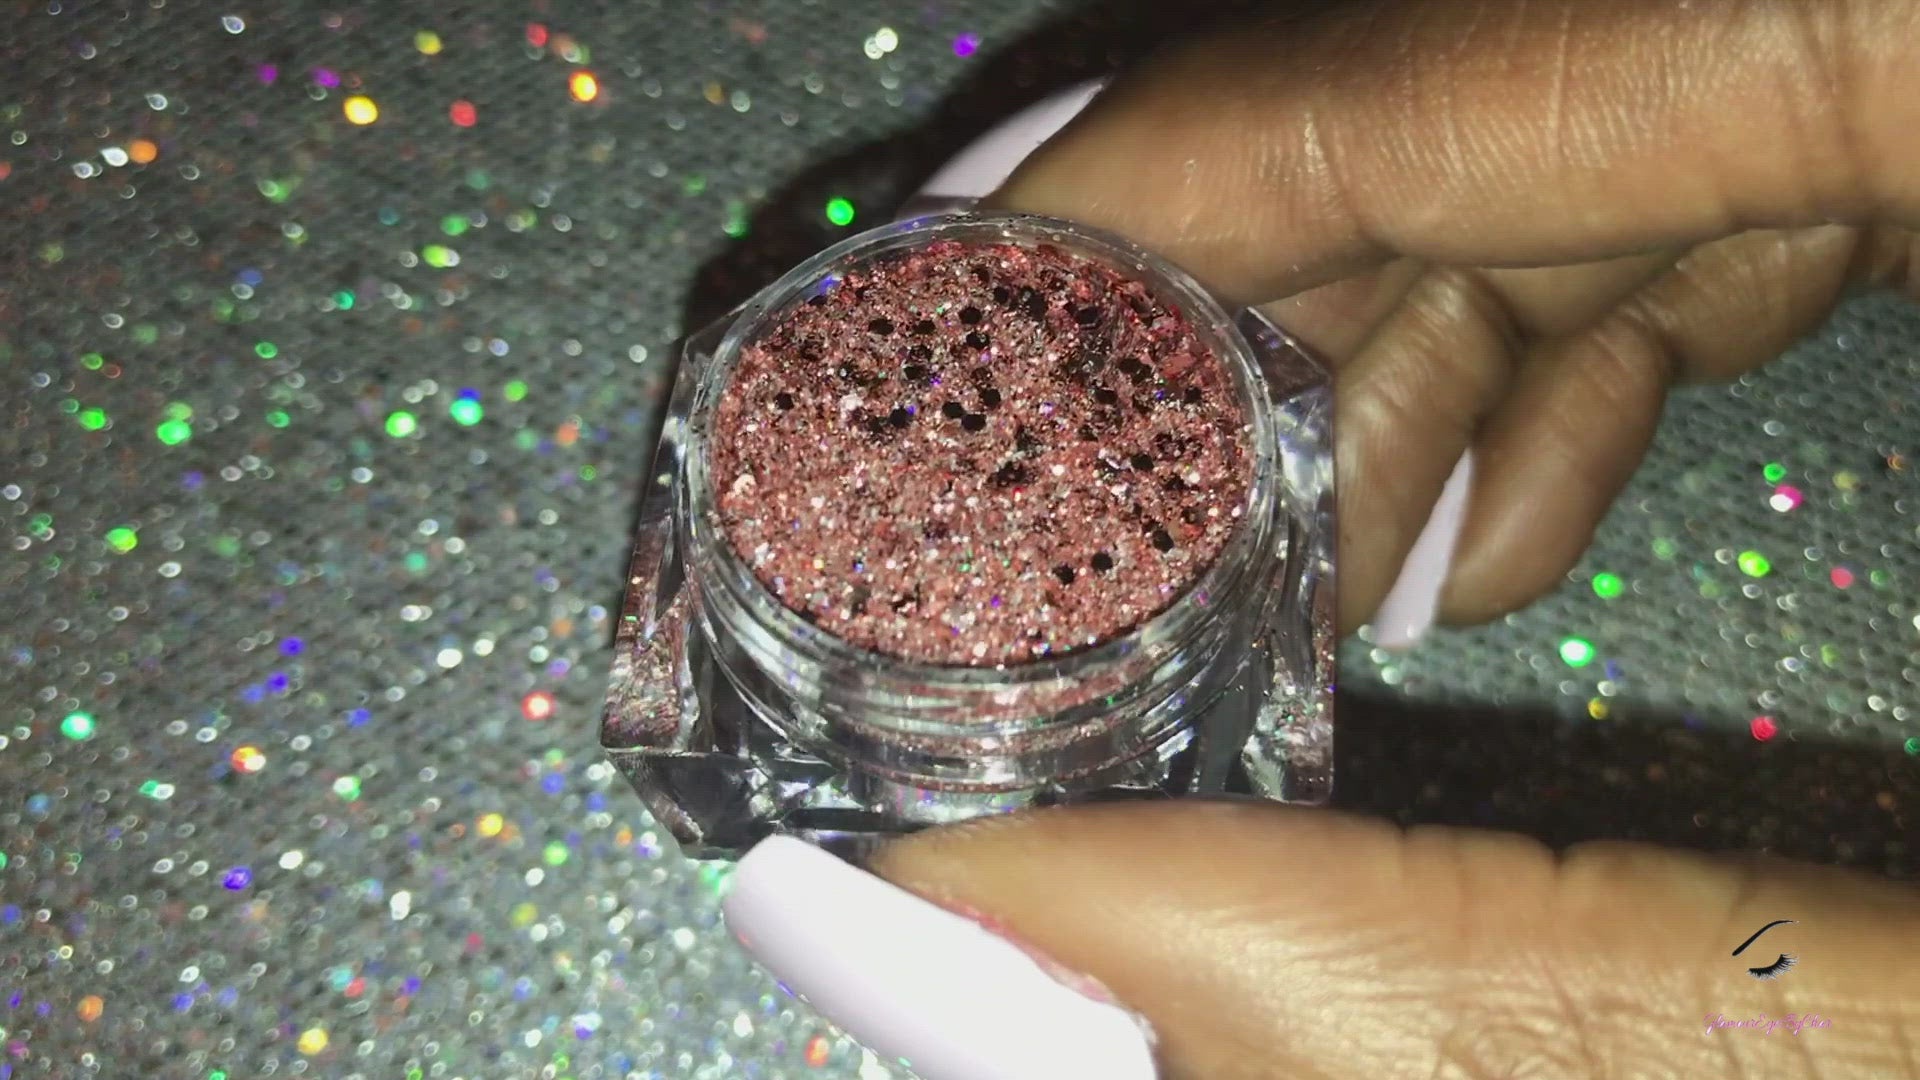 This glitter is called Rose Quartz and is part of the chunky glitter collection. It consists of rose pink glitter with a slight silver holographic sparkle. Rose Quartz can be used for your face, body, hair and nails.